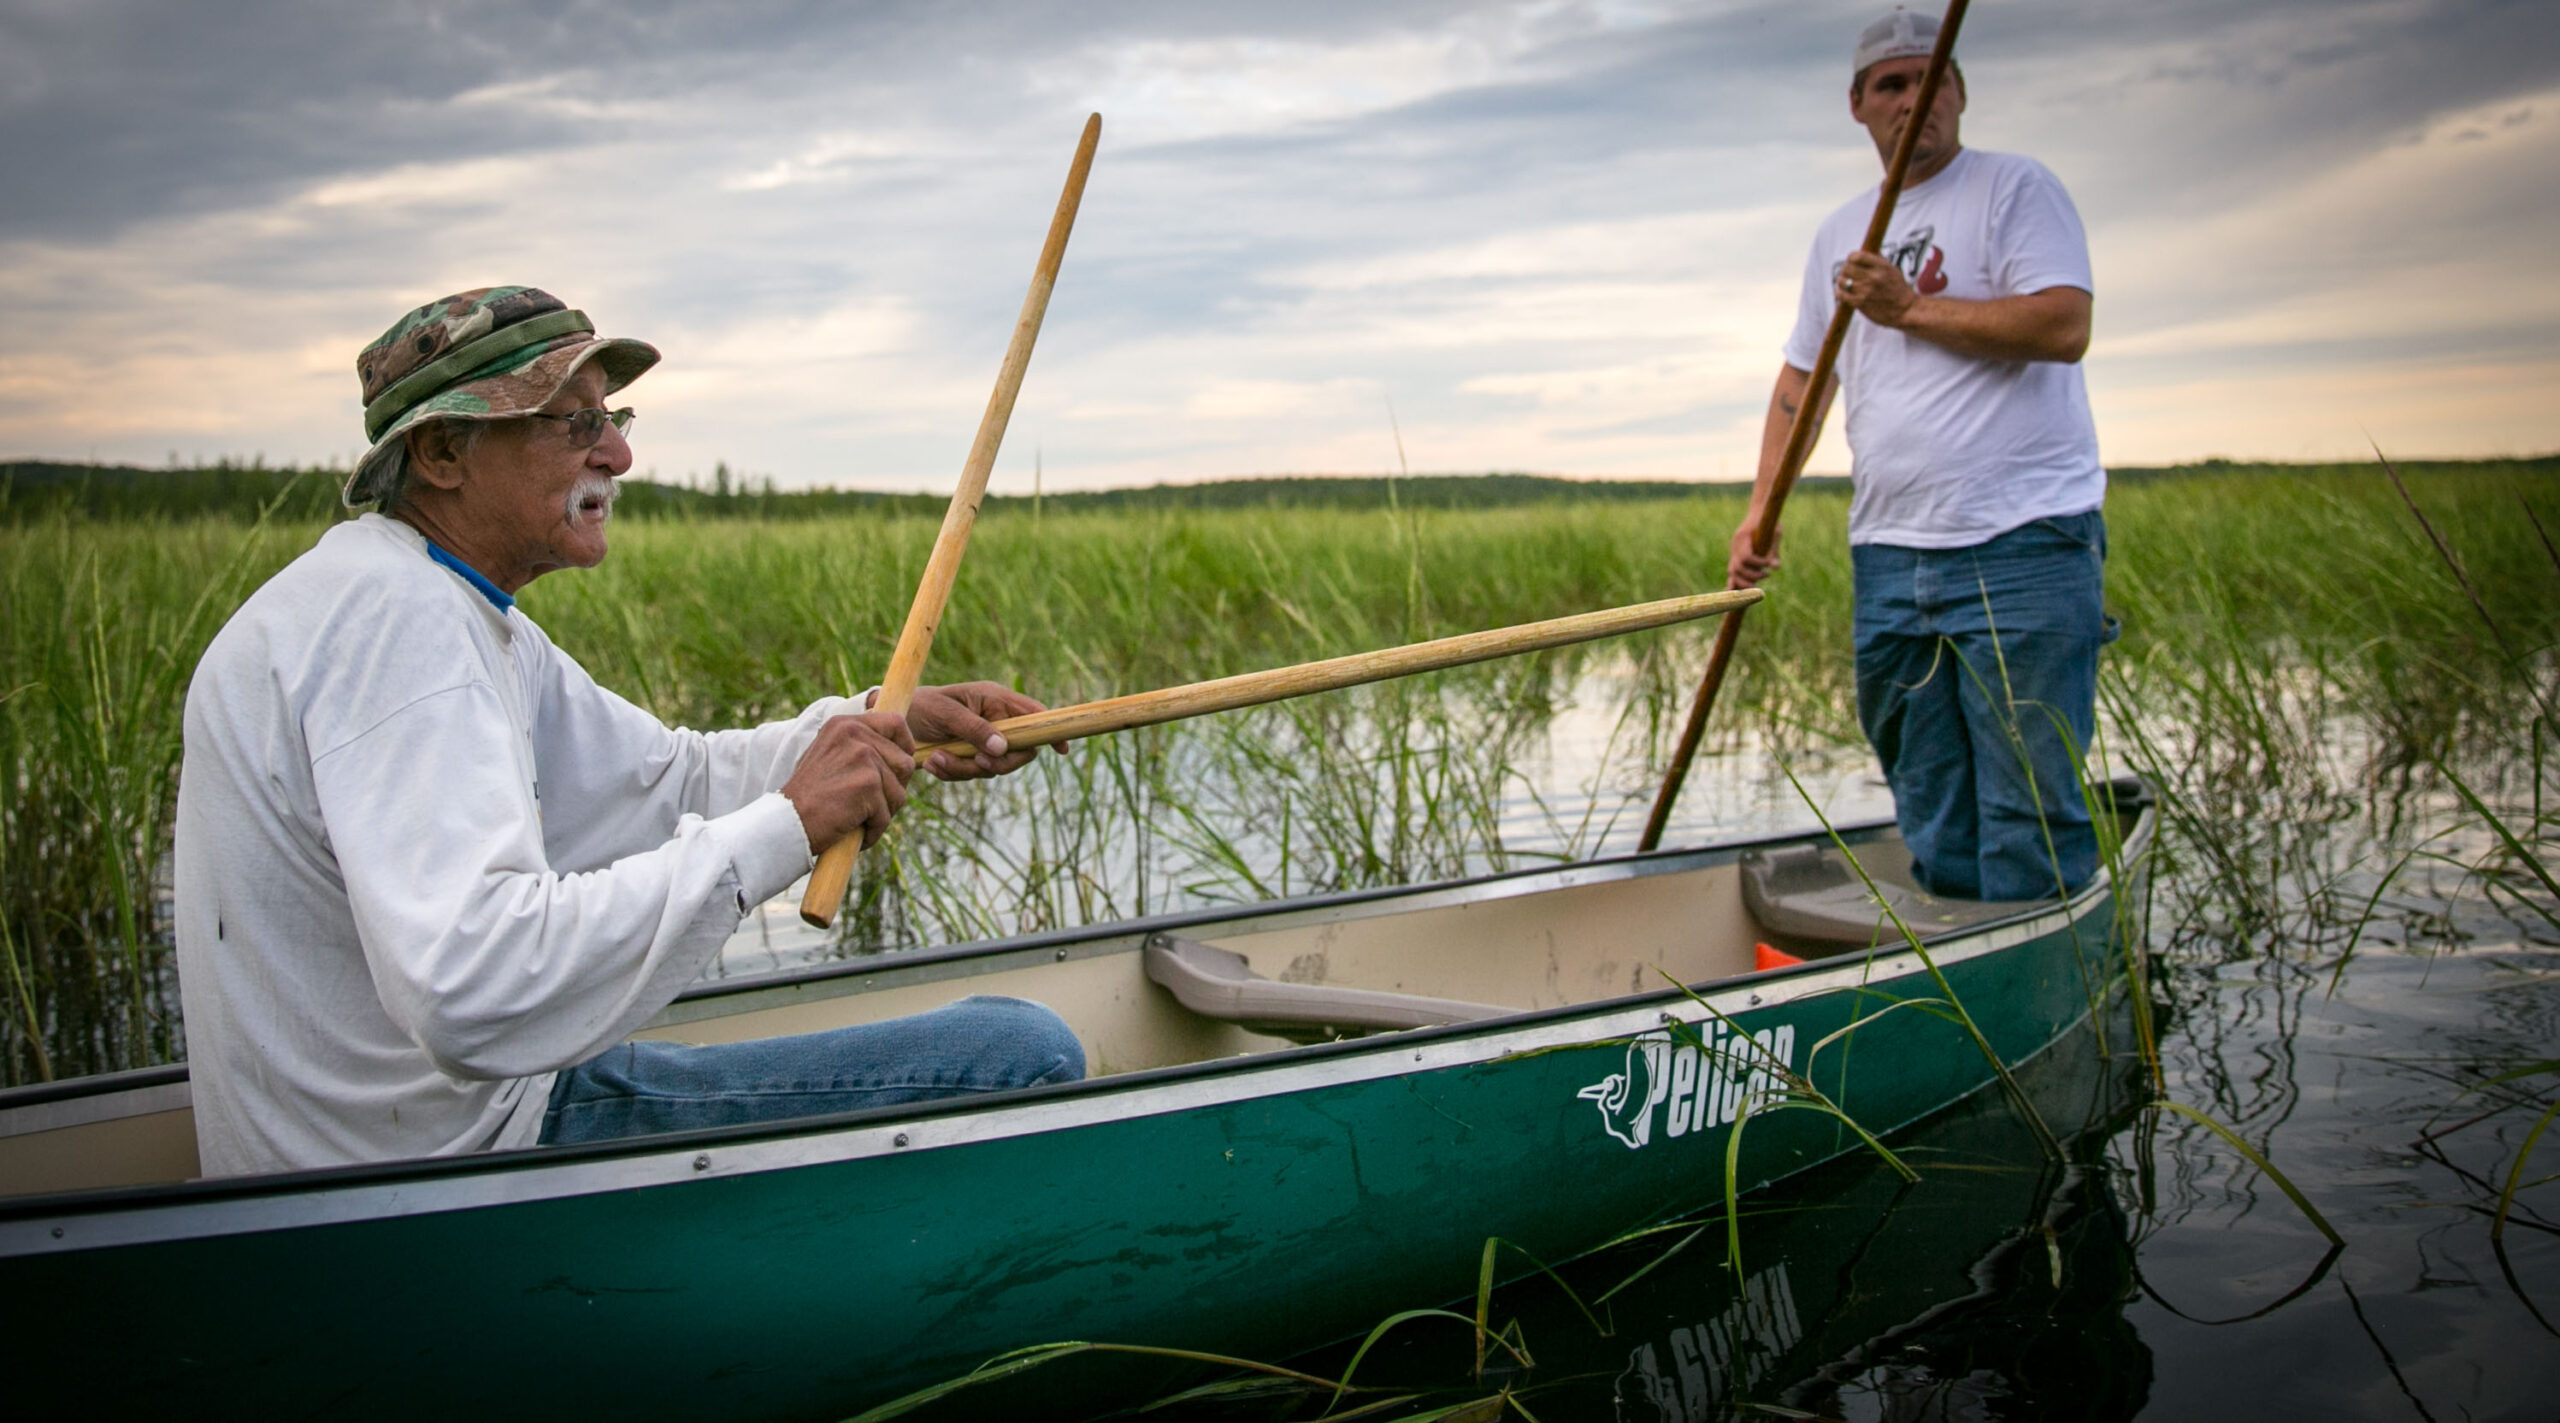 Two men ricing in a green canoe through a marshy area with tall grasses under a cloudy sky.